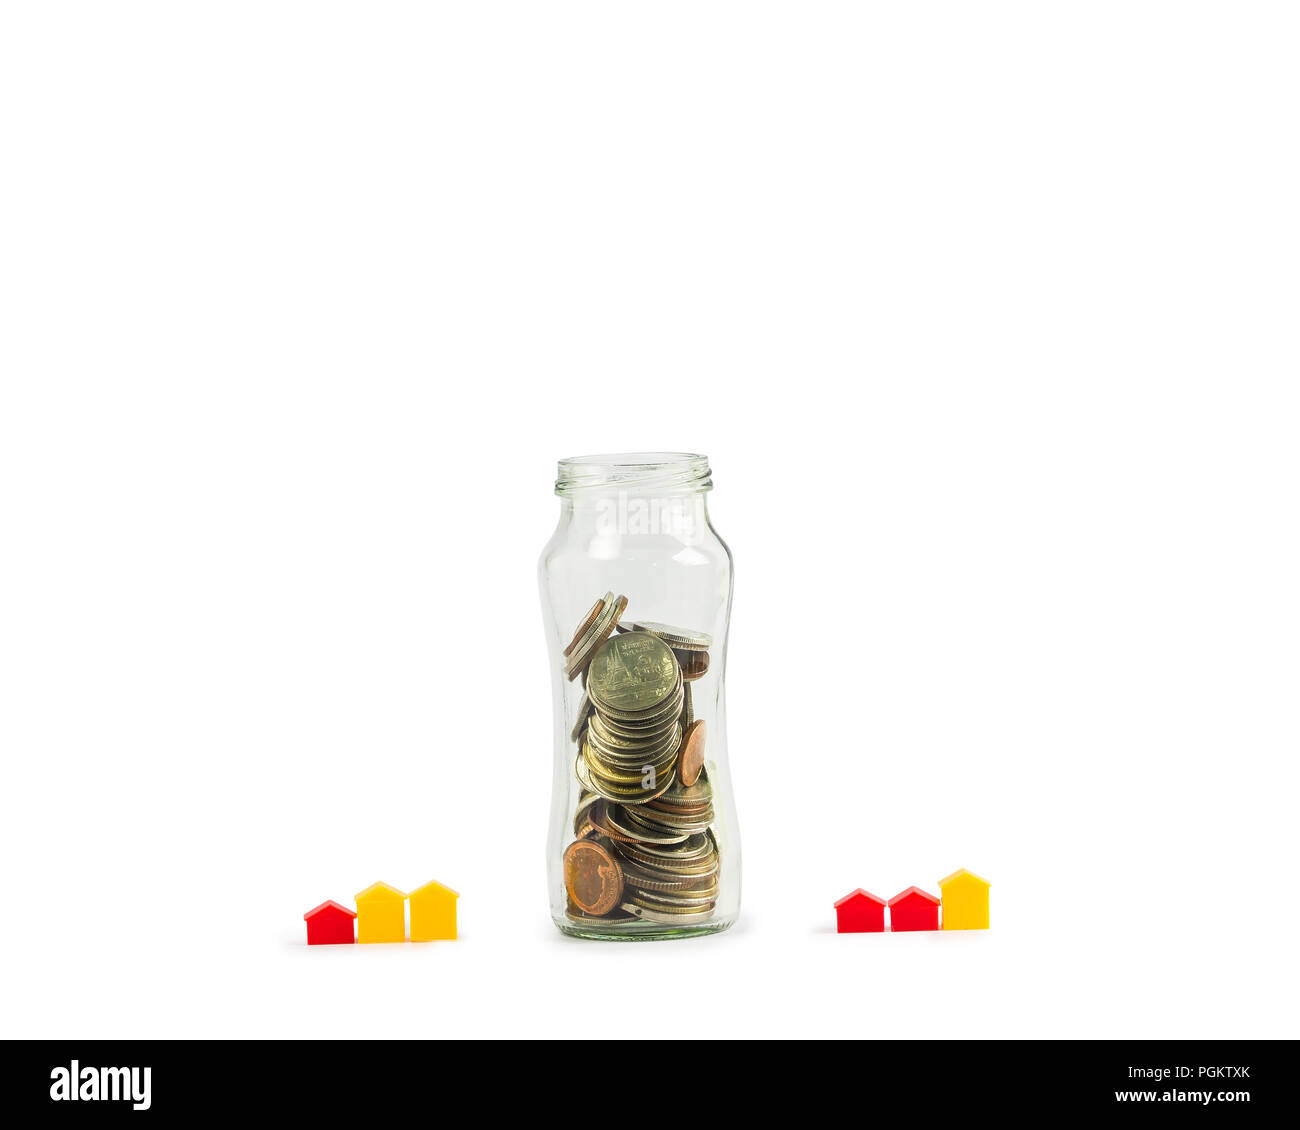 Investment Savings: Growing money for Home Loan Concepts: Full Coins in Clear Glass Bottles with a Small House or Hotel on a White Background include  Stock Photo